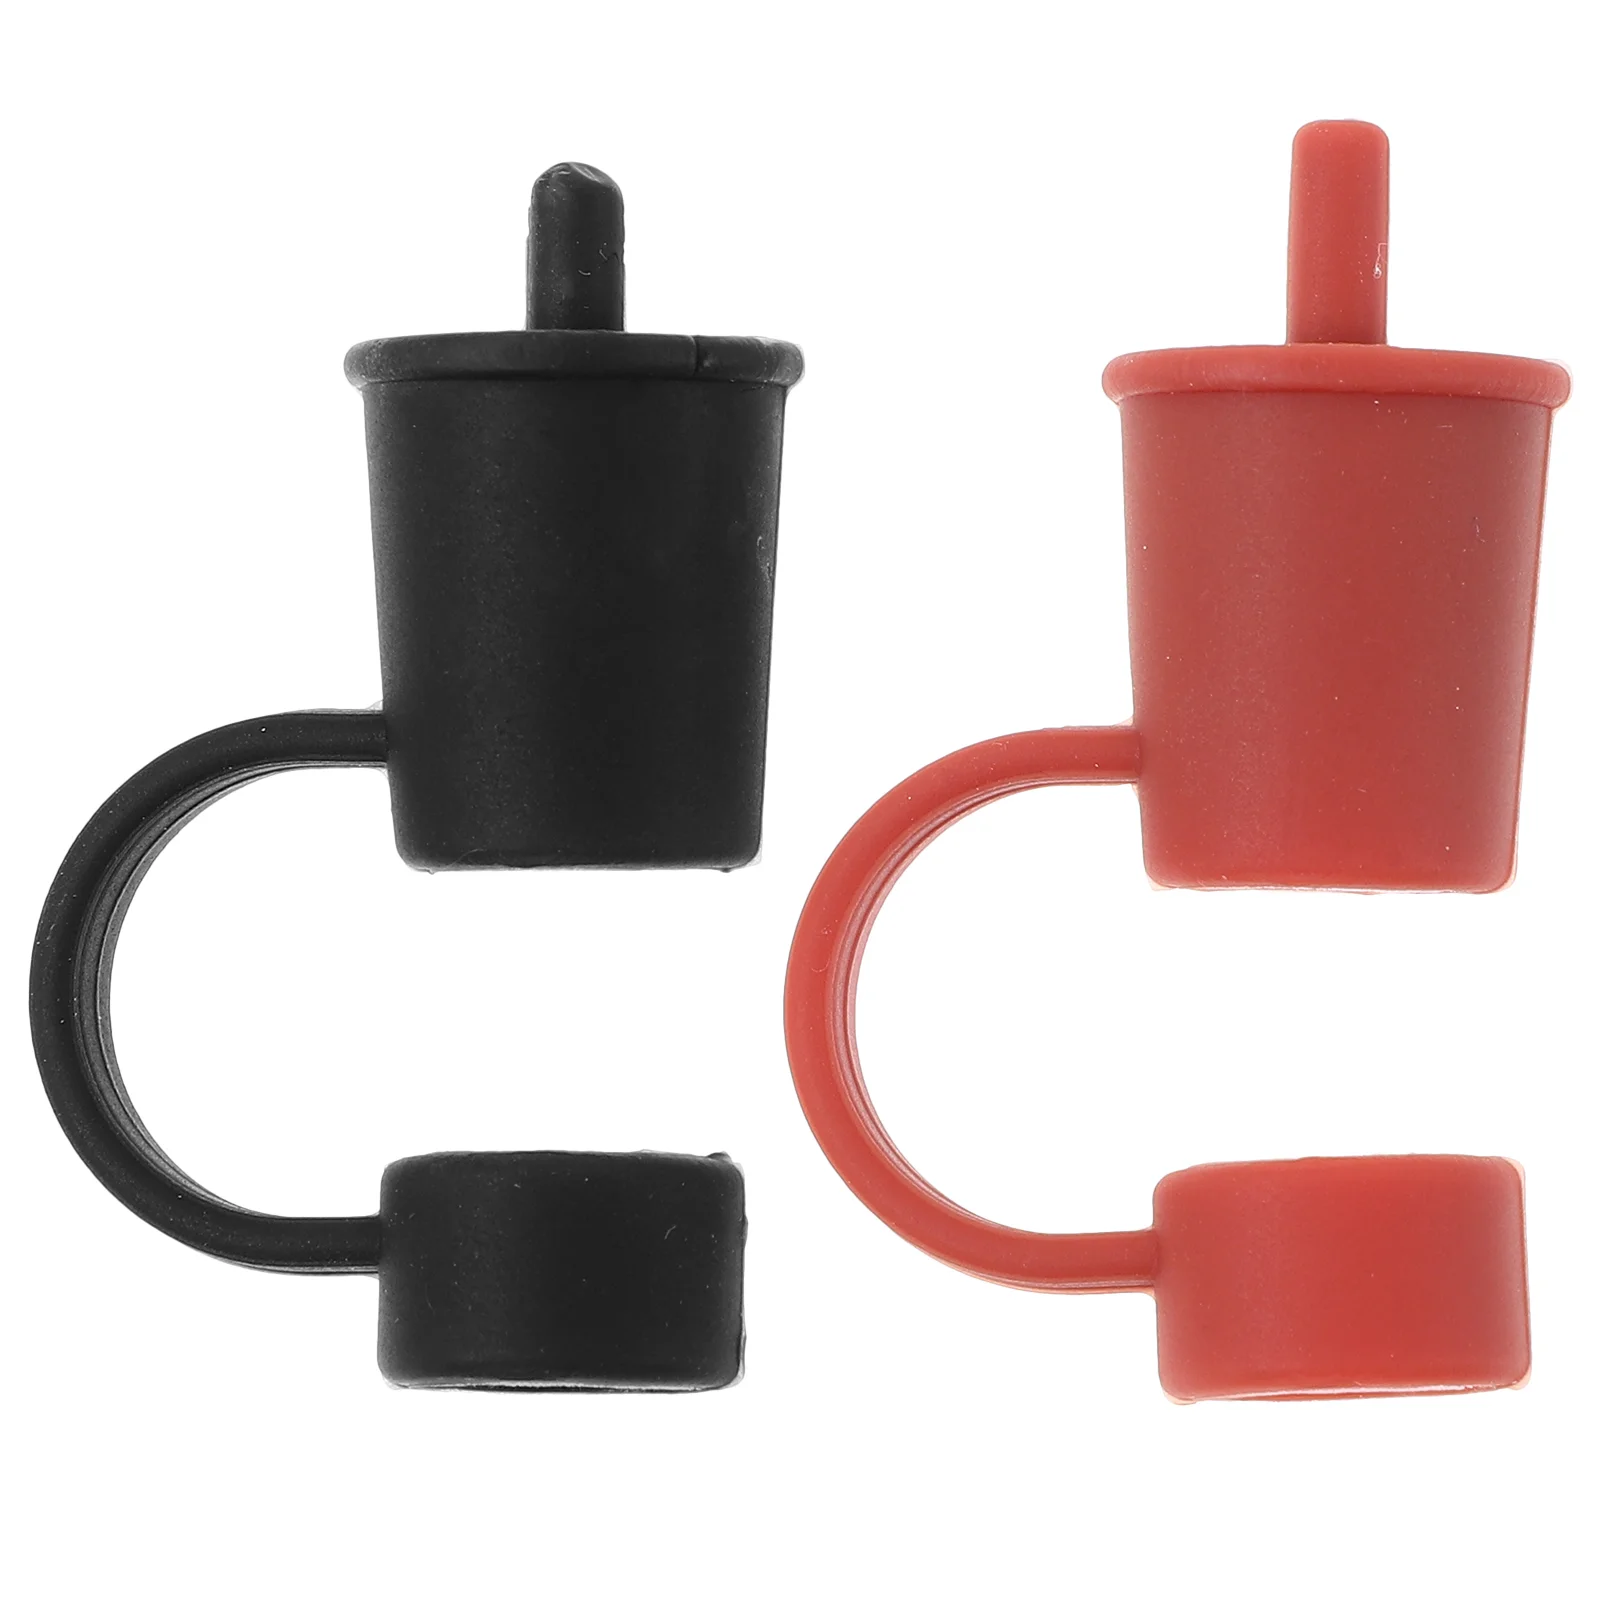 

Straw End Plugs Caps Reusable Straws Drinking Silicone Tip Covers Toppers Tips Decor Supplies